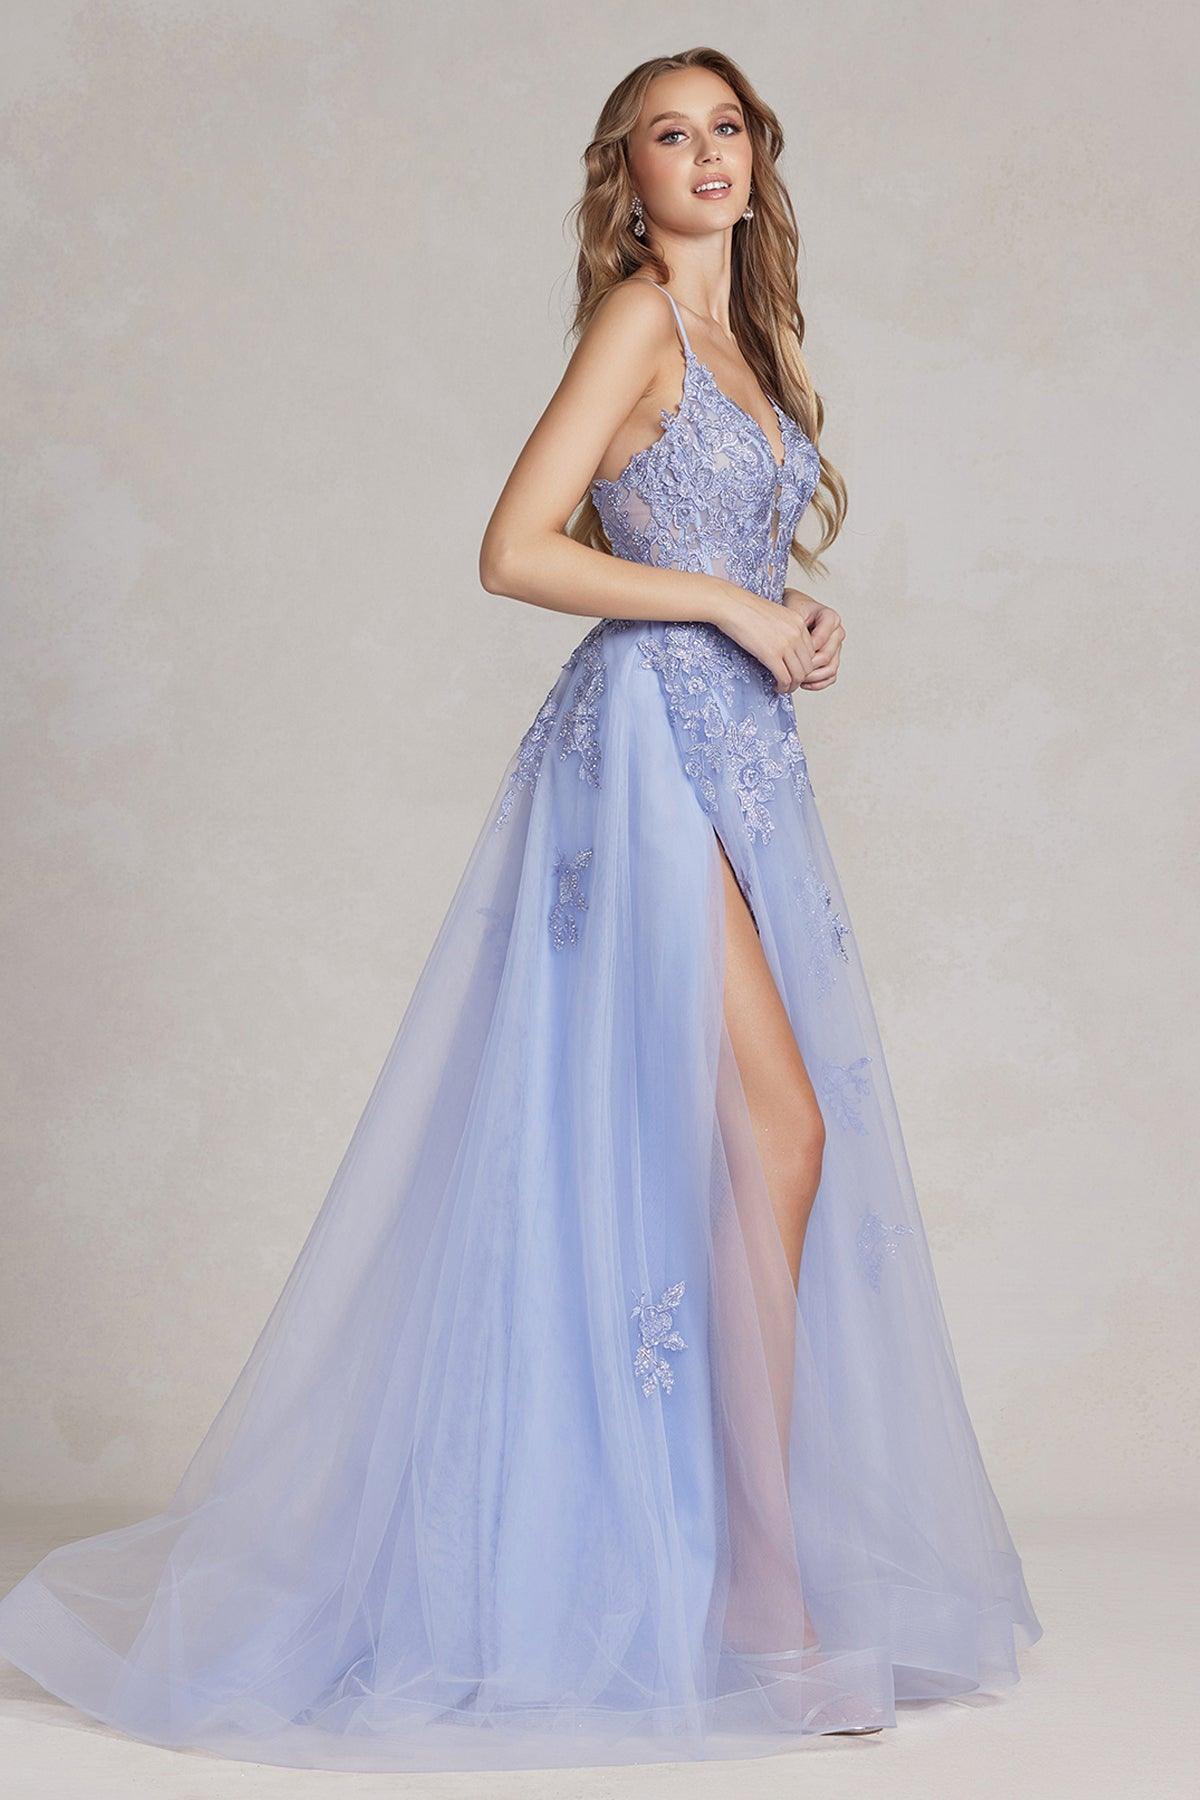 Nox Anabel G1149 Long Spaghetti Strap Sexy Prom Tulle Gown Light Mauve